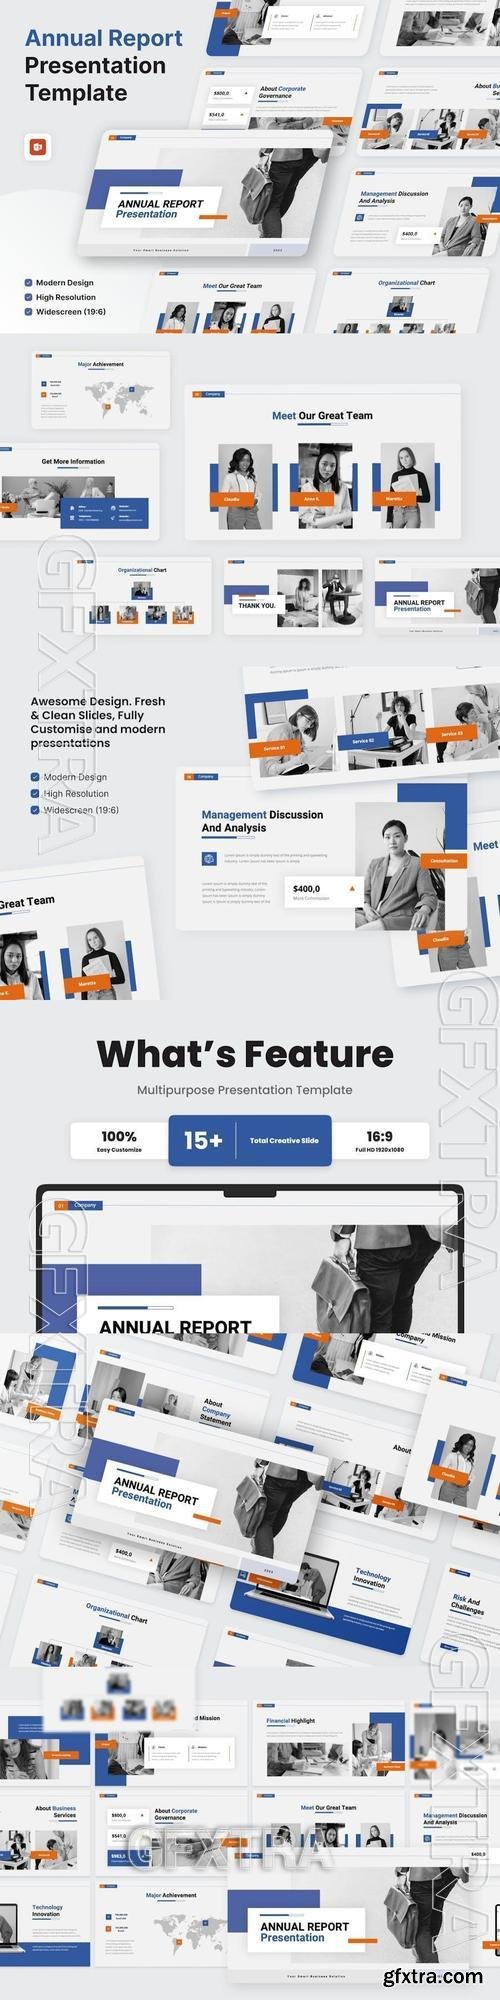 Annual Report PowerPoint Template DHCQYQQ